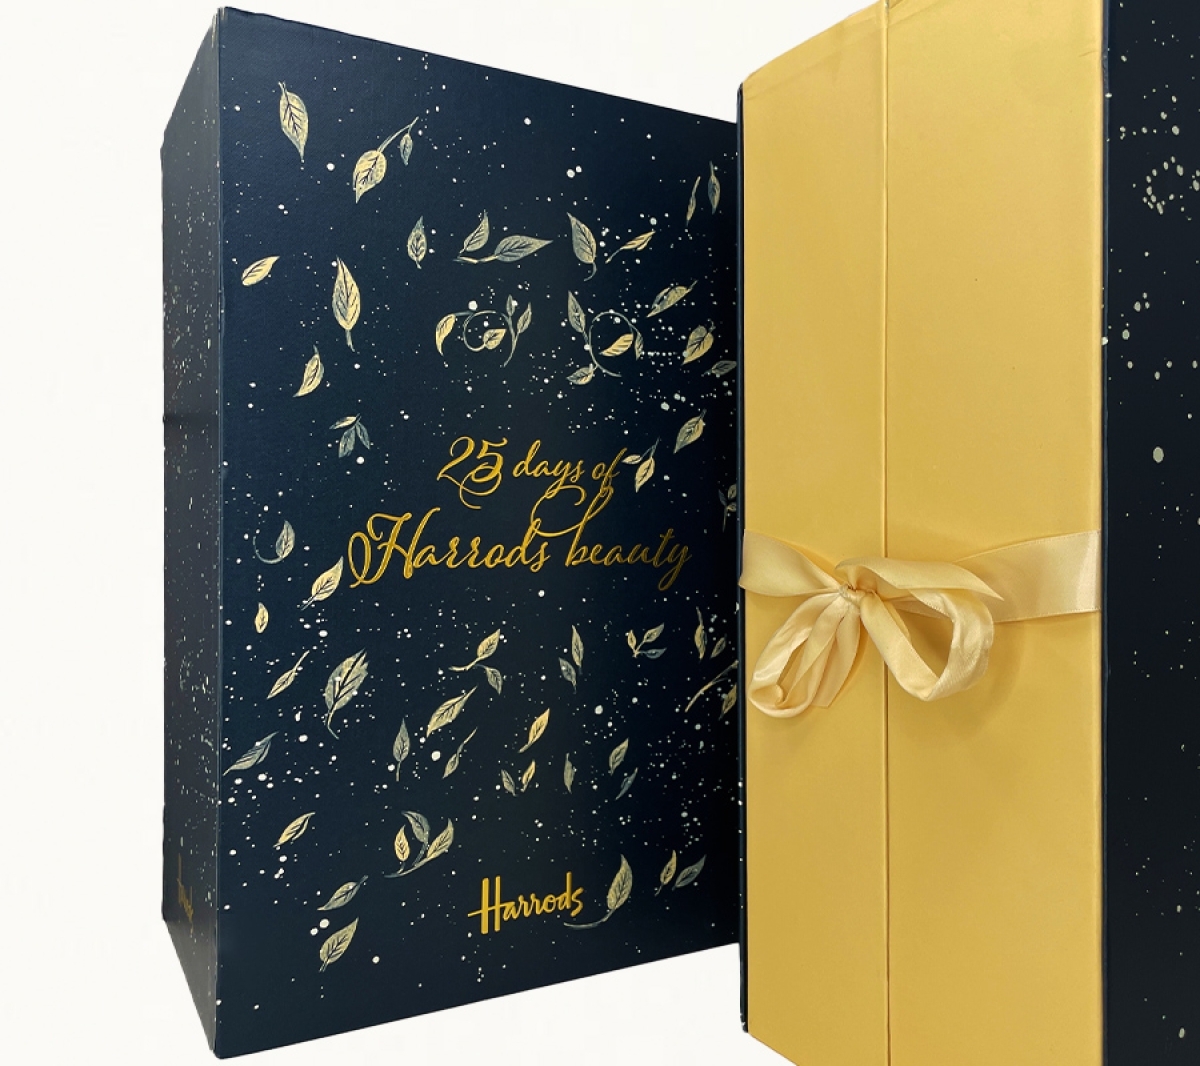 Harrods-luxury-advent-calendar-branded-outer-cover-case